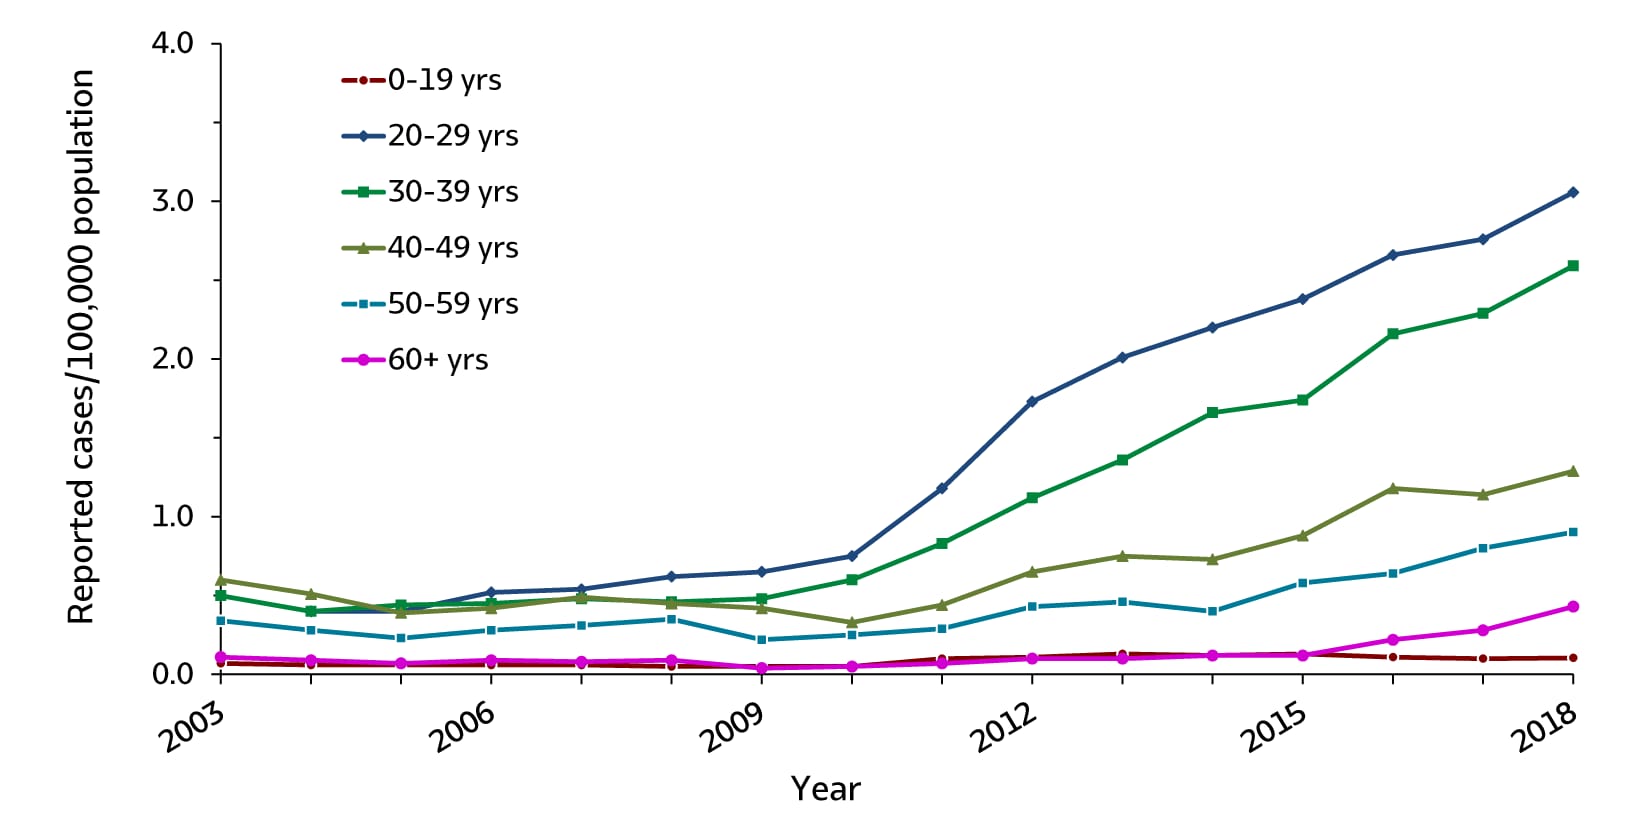 Figure 3.4. The line graph shows trends in rates of acute hepatitis C by age groups (0 – 19 years, 20 – 29 years, 30 – 39 years, 40 – 49 years, 50 – 59 years, and 60 years and older) for 2003 through 2018. Apart from age group aged 0-19 years, the rates of acute hepatitis C have increased during the time period.  There was a greater increase in reported acute hepatitis C cases for the 20 – 29 and 30 – 39 age groups, relative to other age groups.